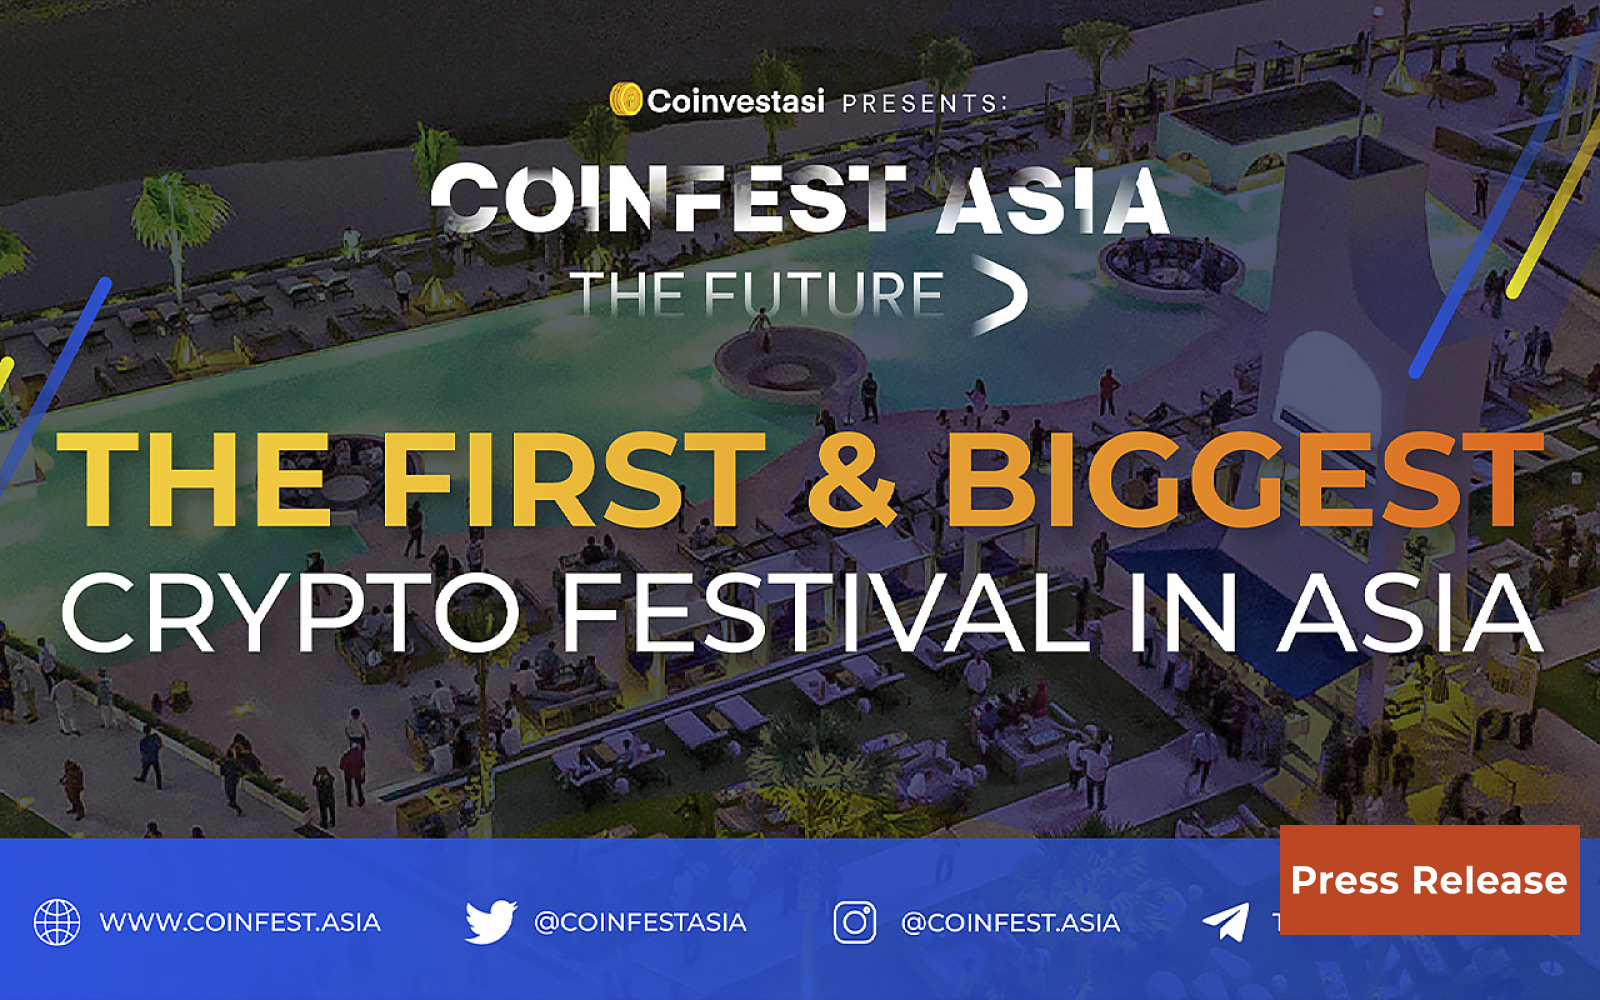 Indonesia to Host Coinfest Asia, The First and Biggest Crypto Festival